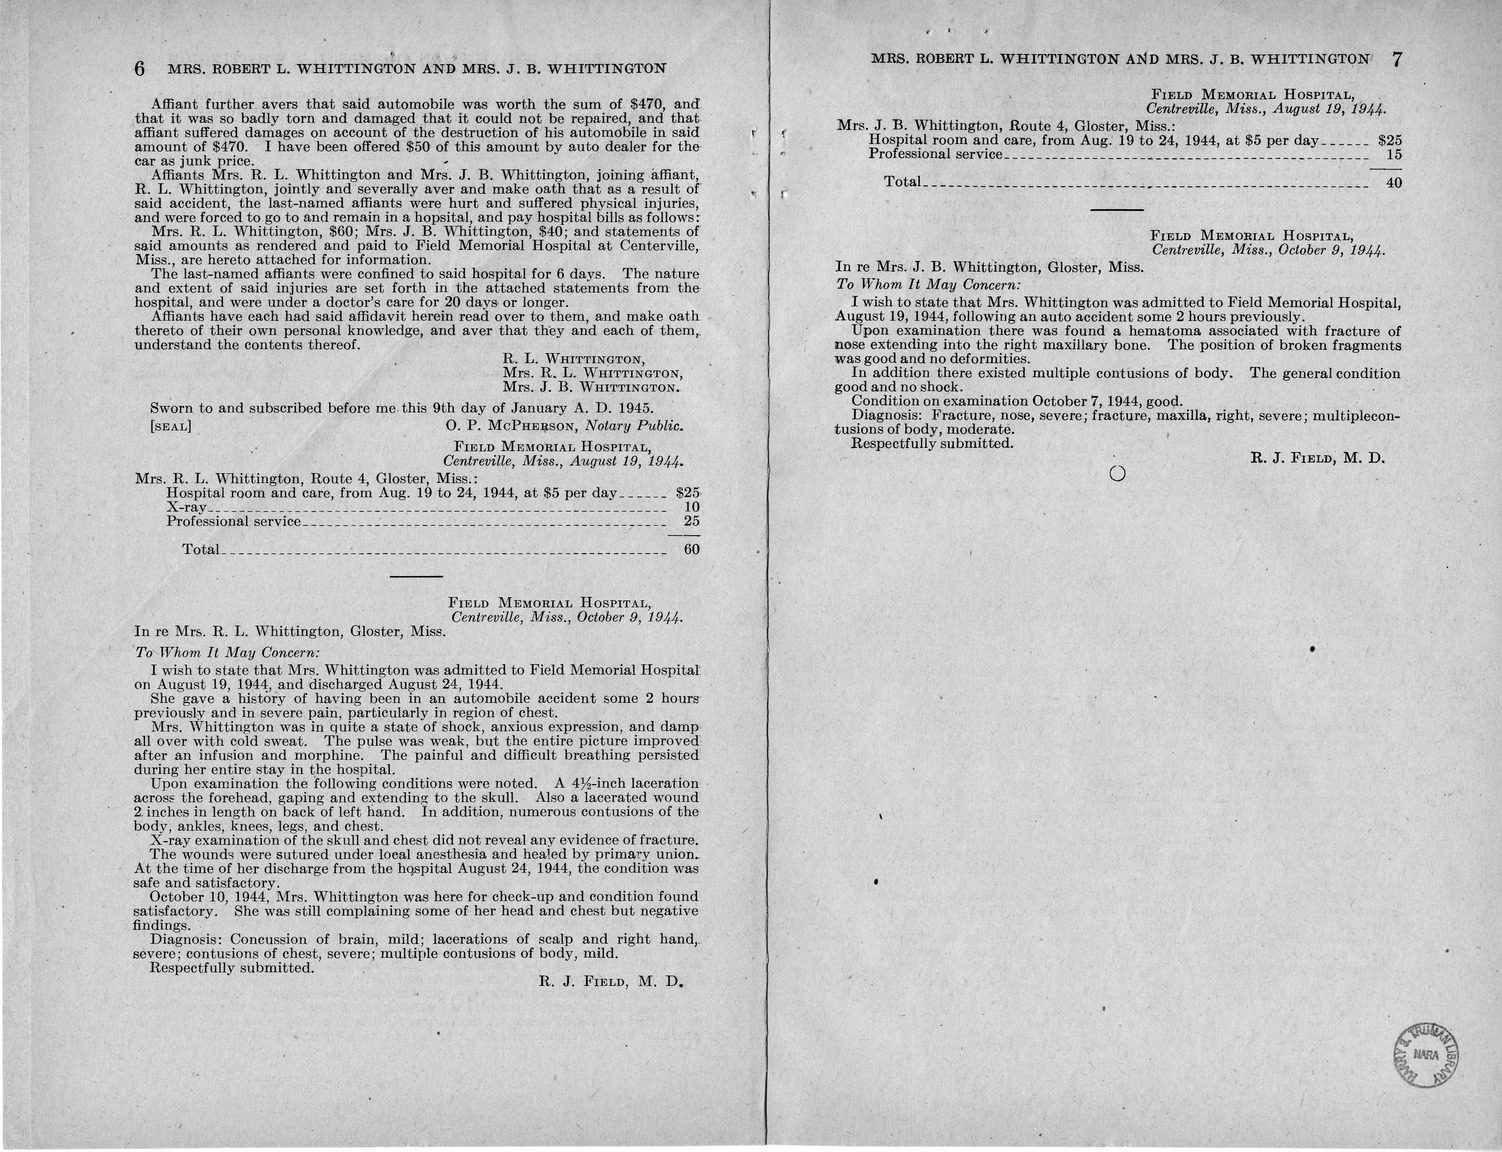 Memorandum from Frederick J. Bailey to M. C. Latta, H.R. 1882, For the Relief of R. L. Whittington, Mrs. R. L. Whittington, and Mrs. J. B. Whittington, with Attachments